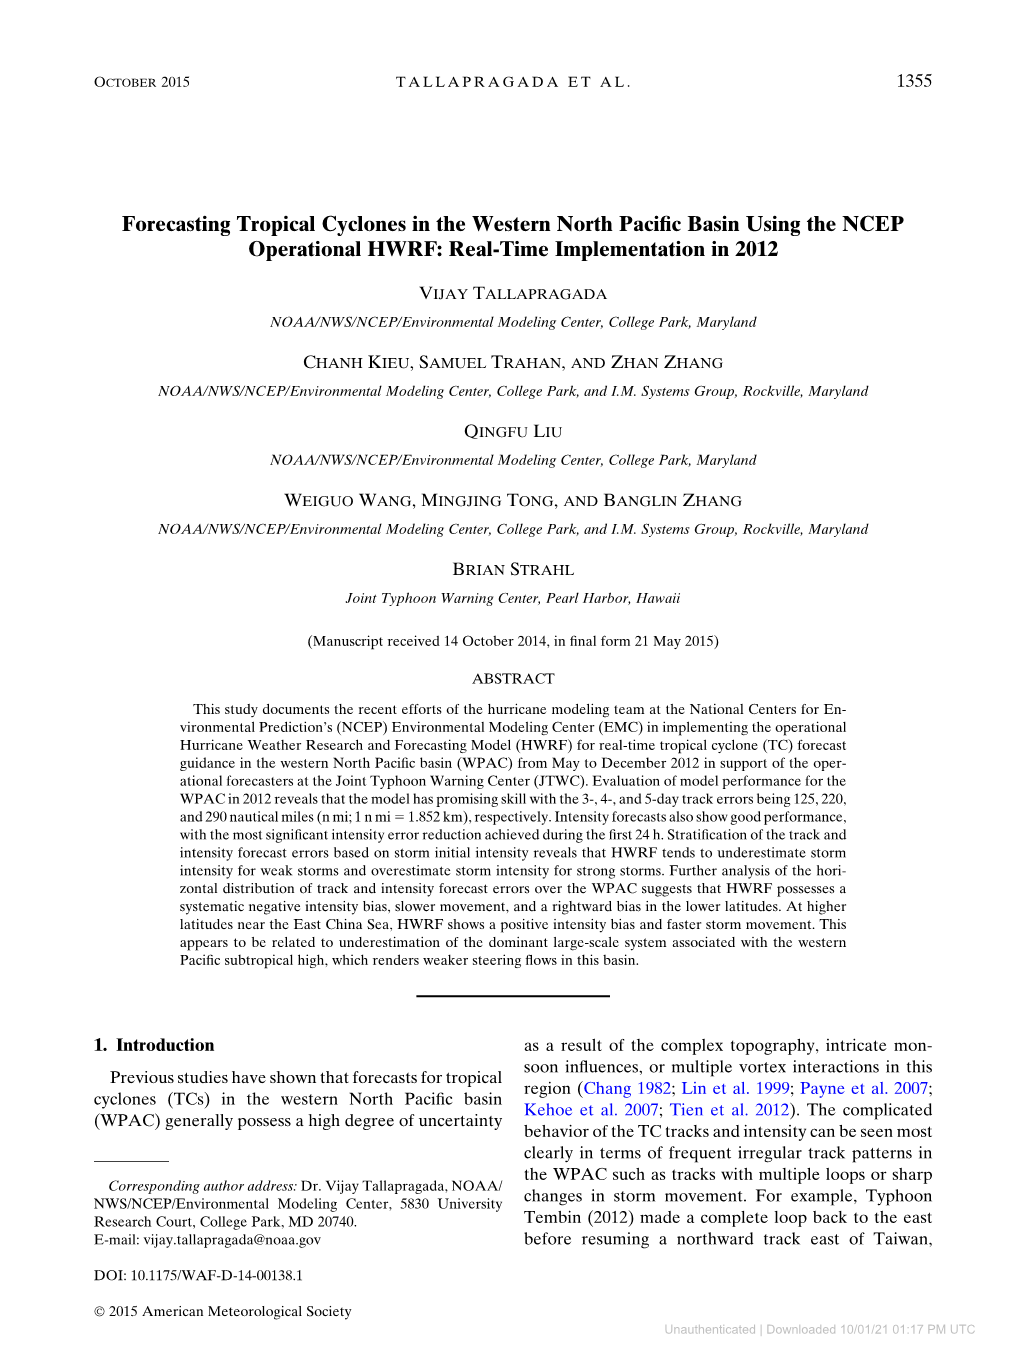 Forecasting Tropical Cyclones in the Western North Pacific Basin Using